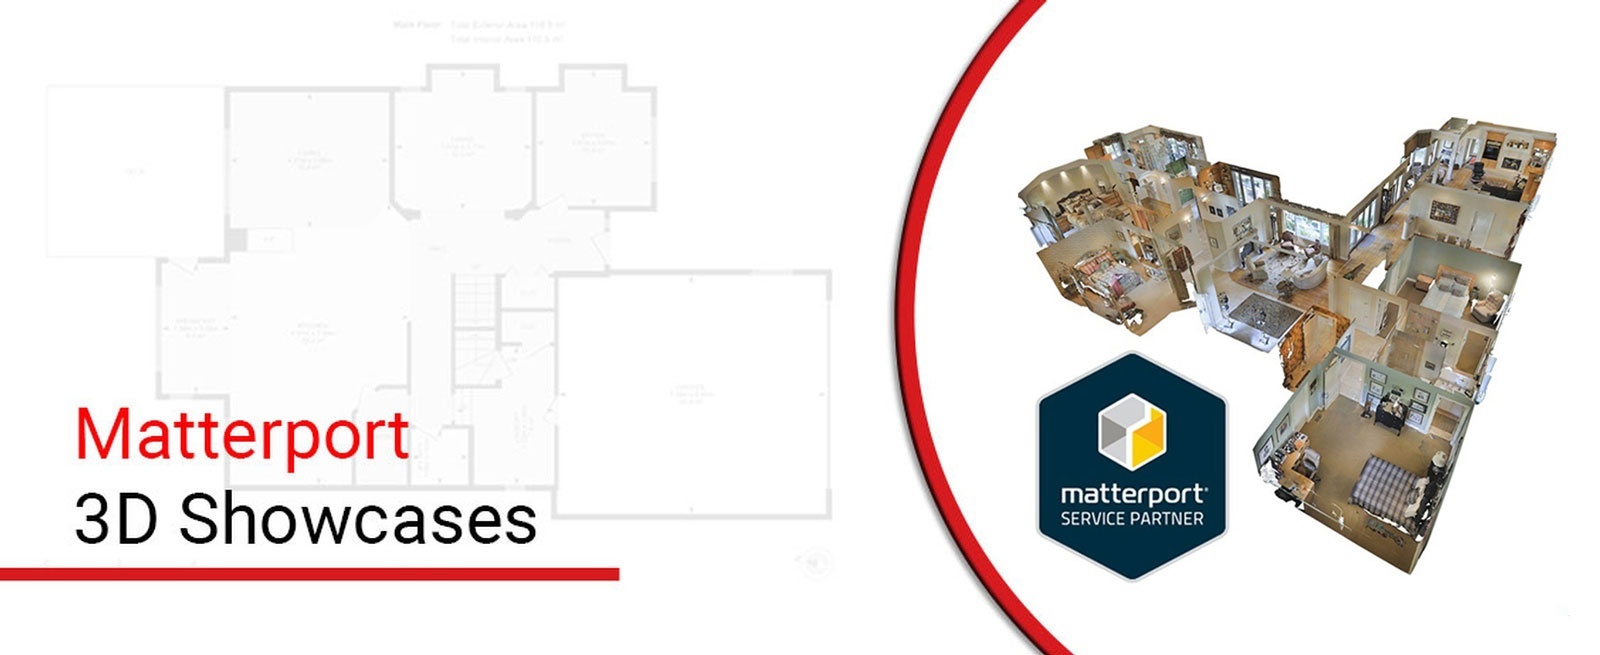 Matterport 3D Showcases - Square Feet Photography and Floor Plans